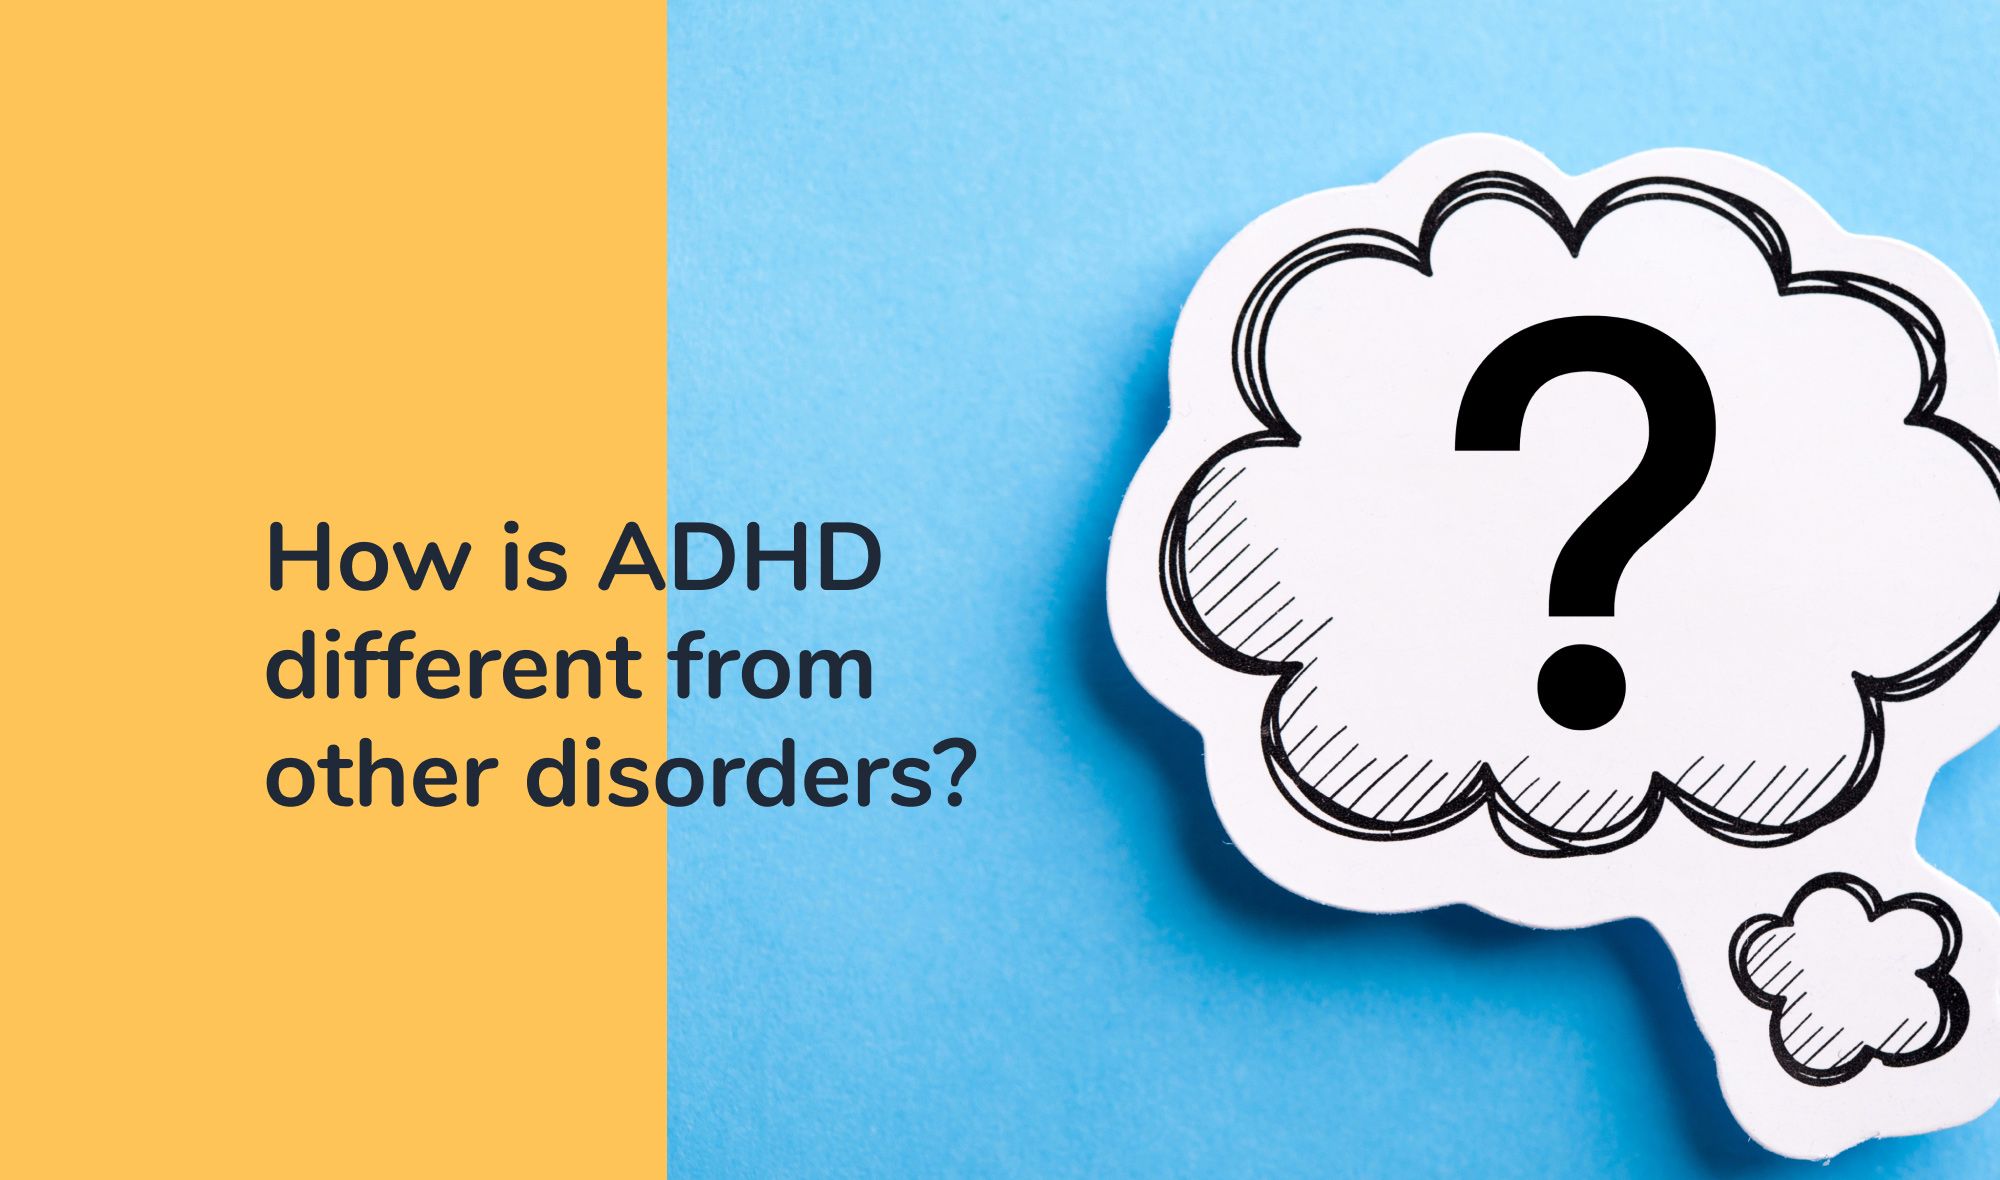 Tools for adults with adhd - How is ADHD different from other disorders?